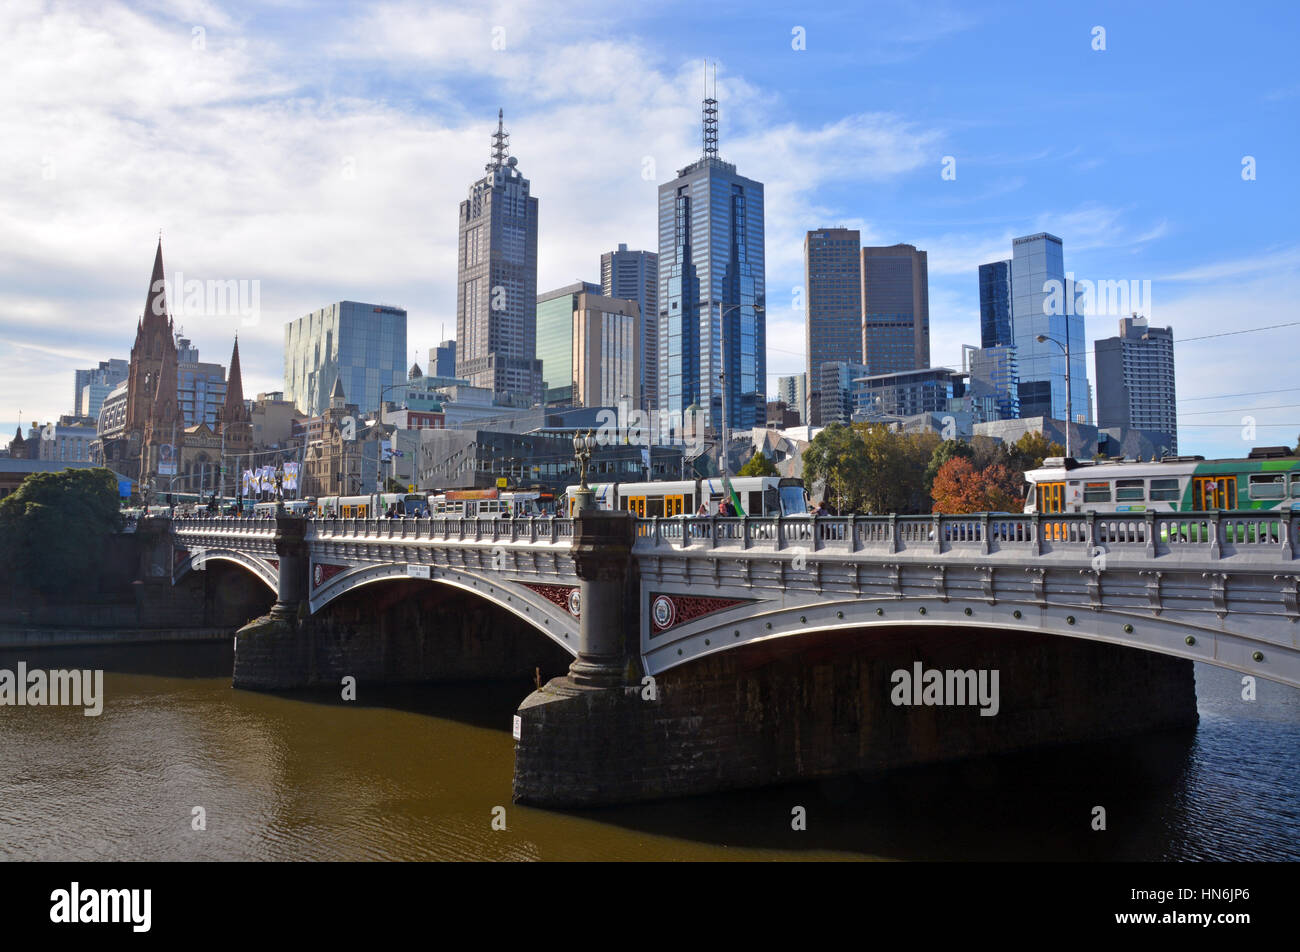 Melbourne, Australia - May 14, 2014: Melbourne city viewed from the South Bank of the Yarra River. In the foreground trams cross the St Kilda Road bri Stock Photo